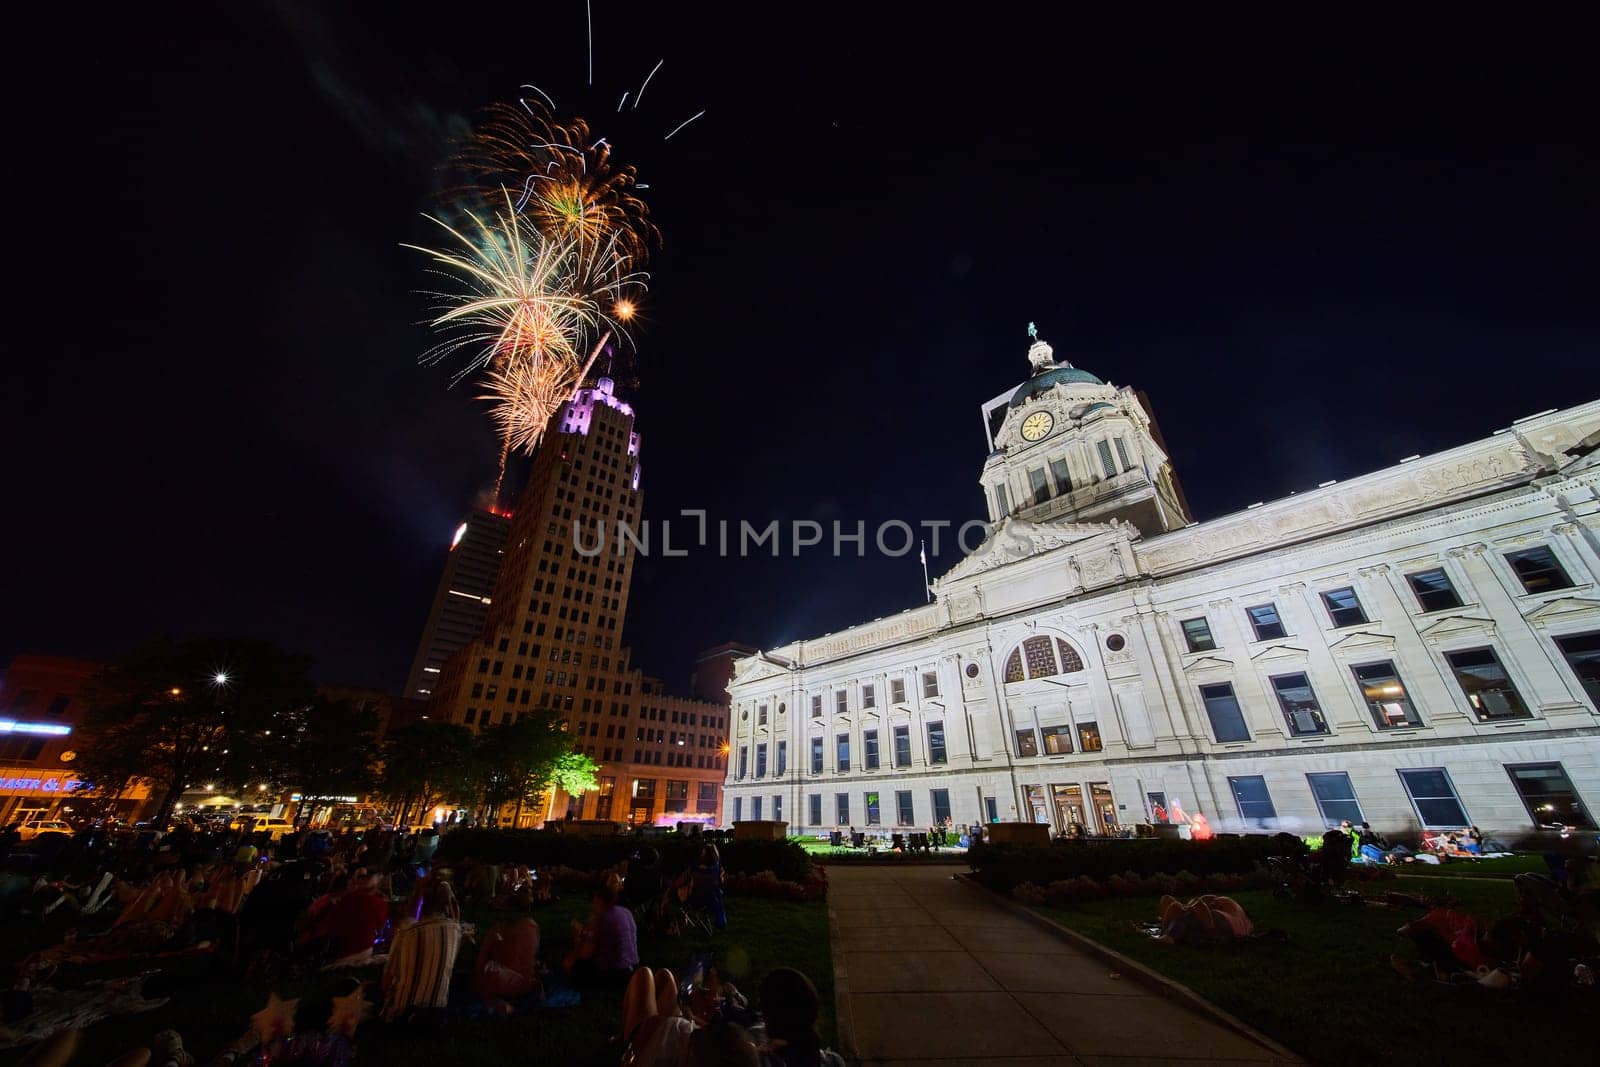 Image of Colorful 4th of July fireworks over Lincoln Tower with courthouse view in Fort Wayne